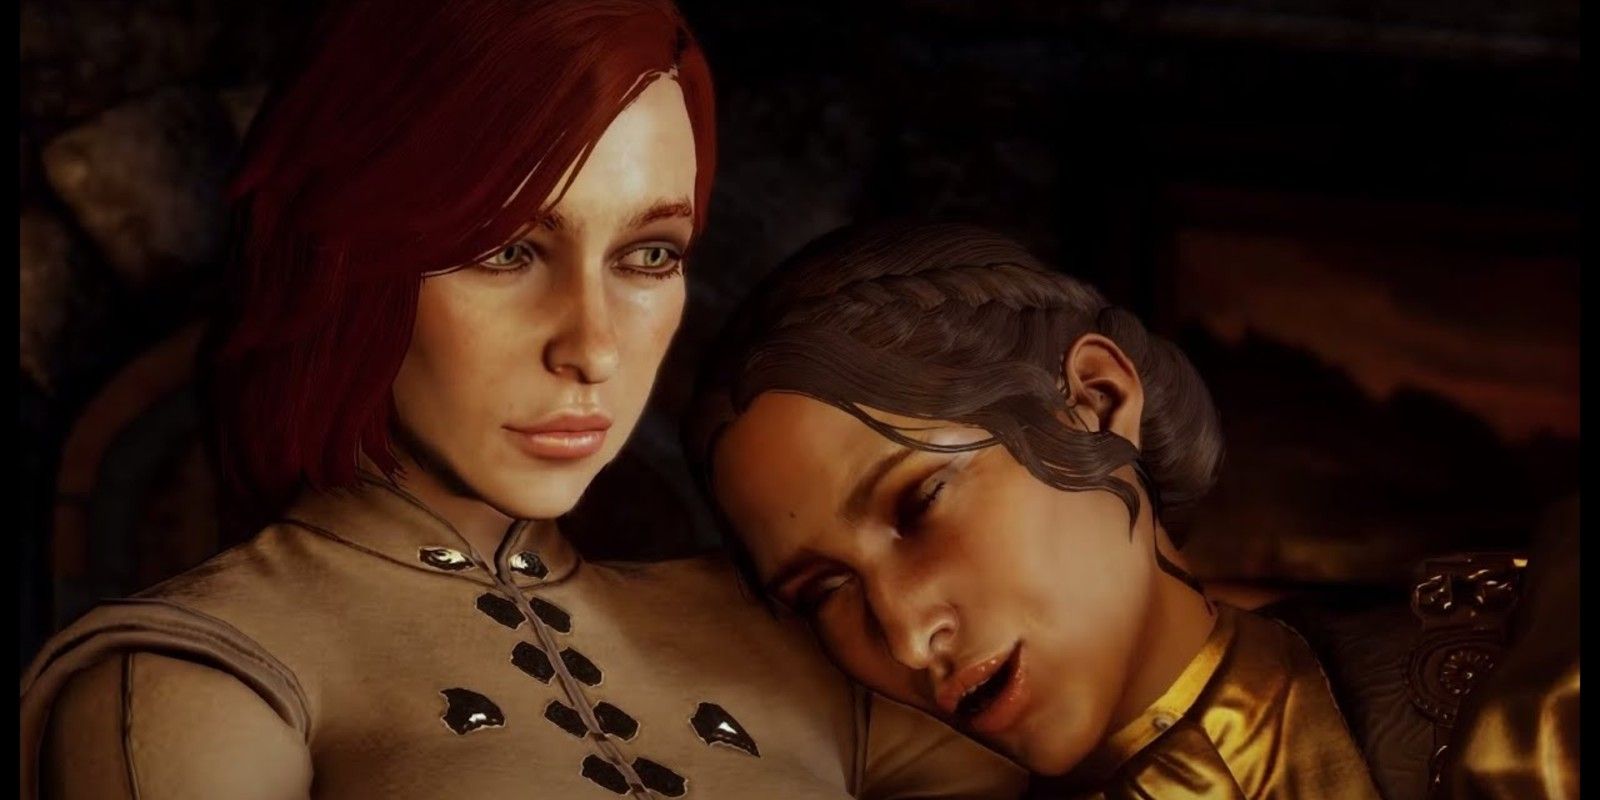 A female Inquisitor shares a romantic moment with Josephine in front of the fire after hard locking their romance in Dragon Age: Inquisition